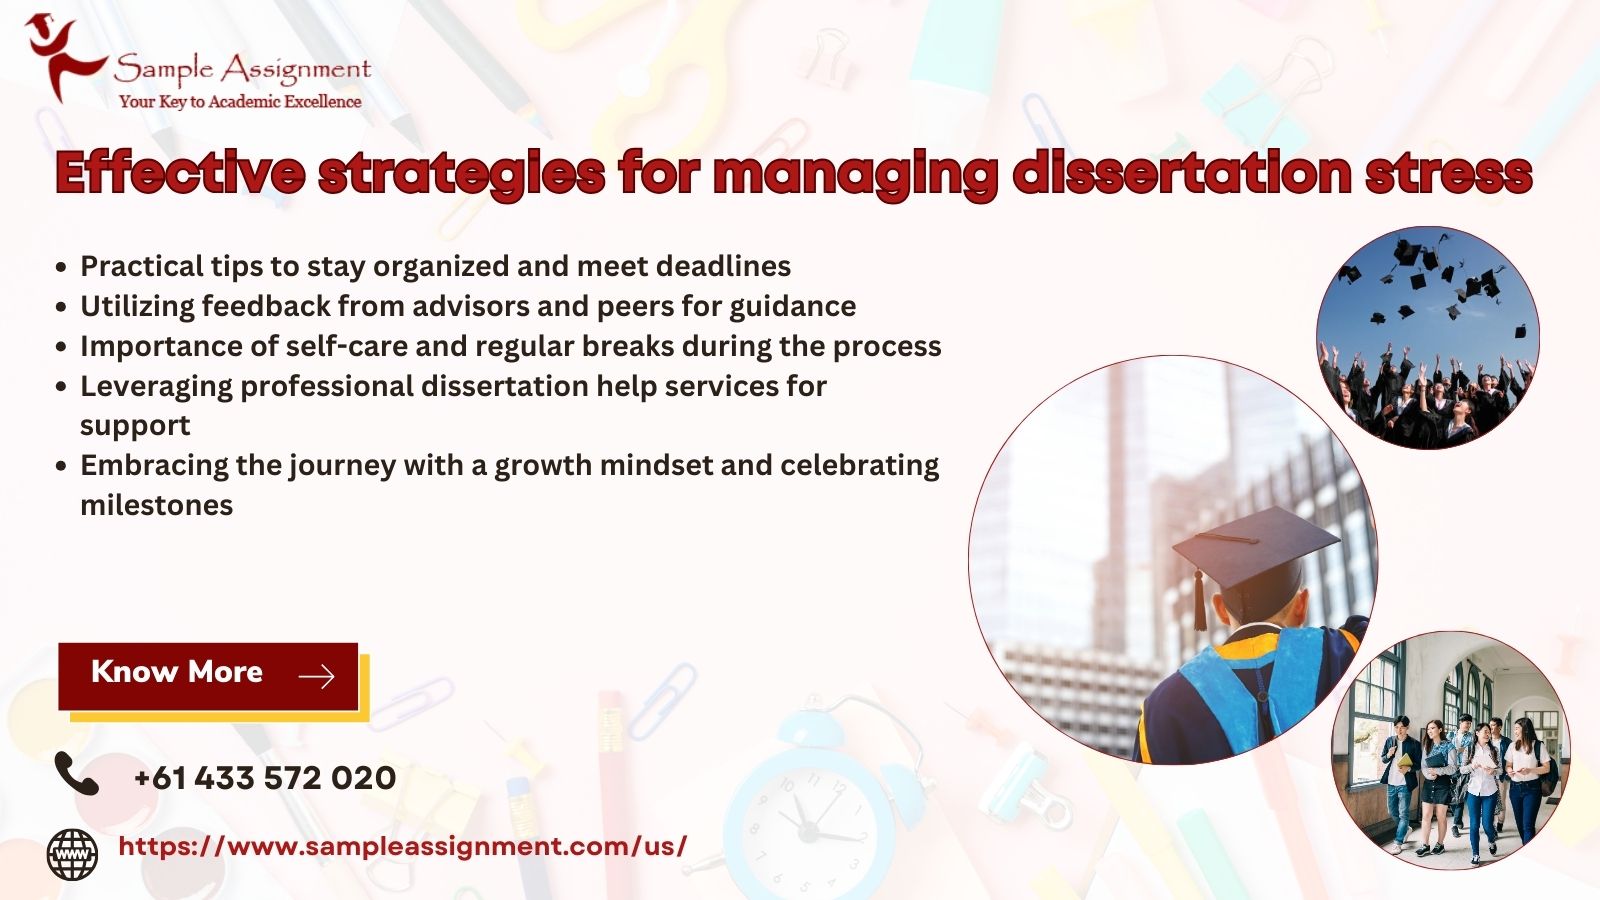 A vibrant image featuring the text overlay reads, "Effective strategies for managing dissertation stress," emphasizing a focus on efficient and reliable academic support.